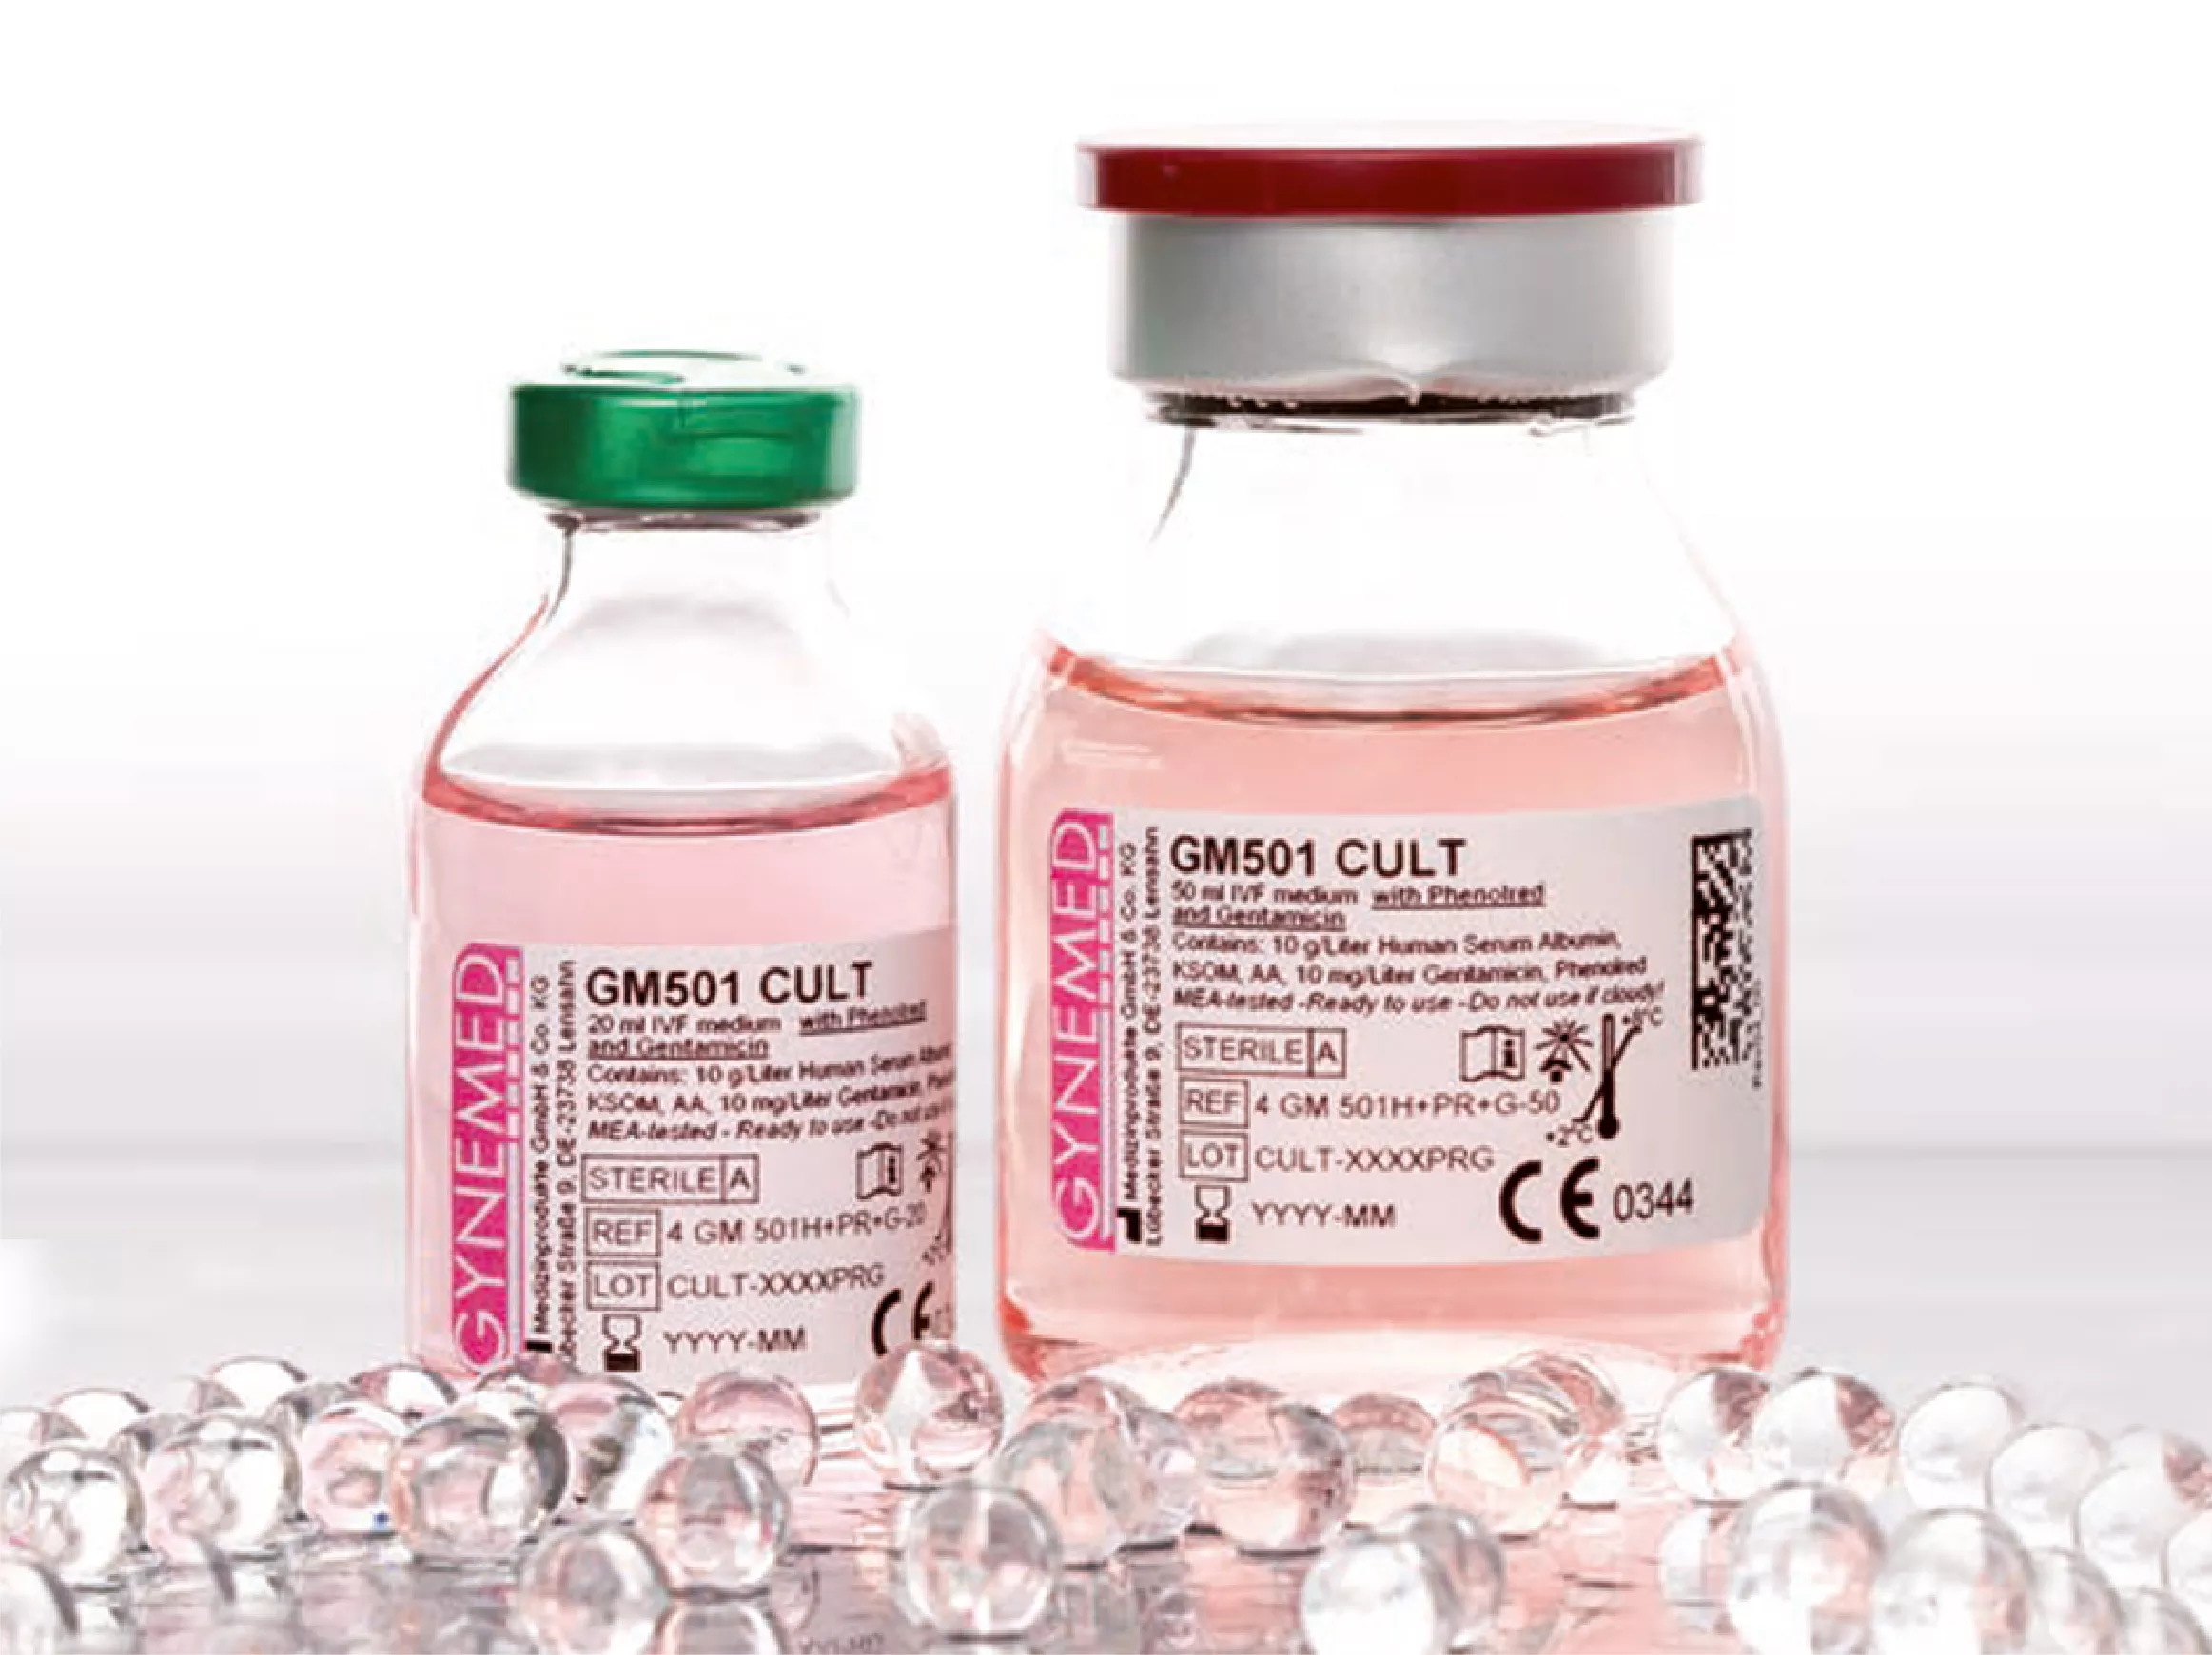 Gynemed GM501 Cult with Gentamicin and Phenolred